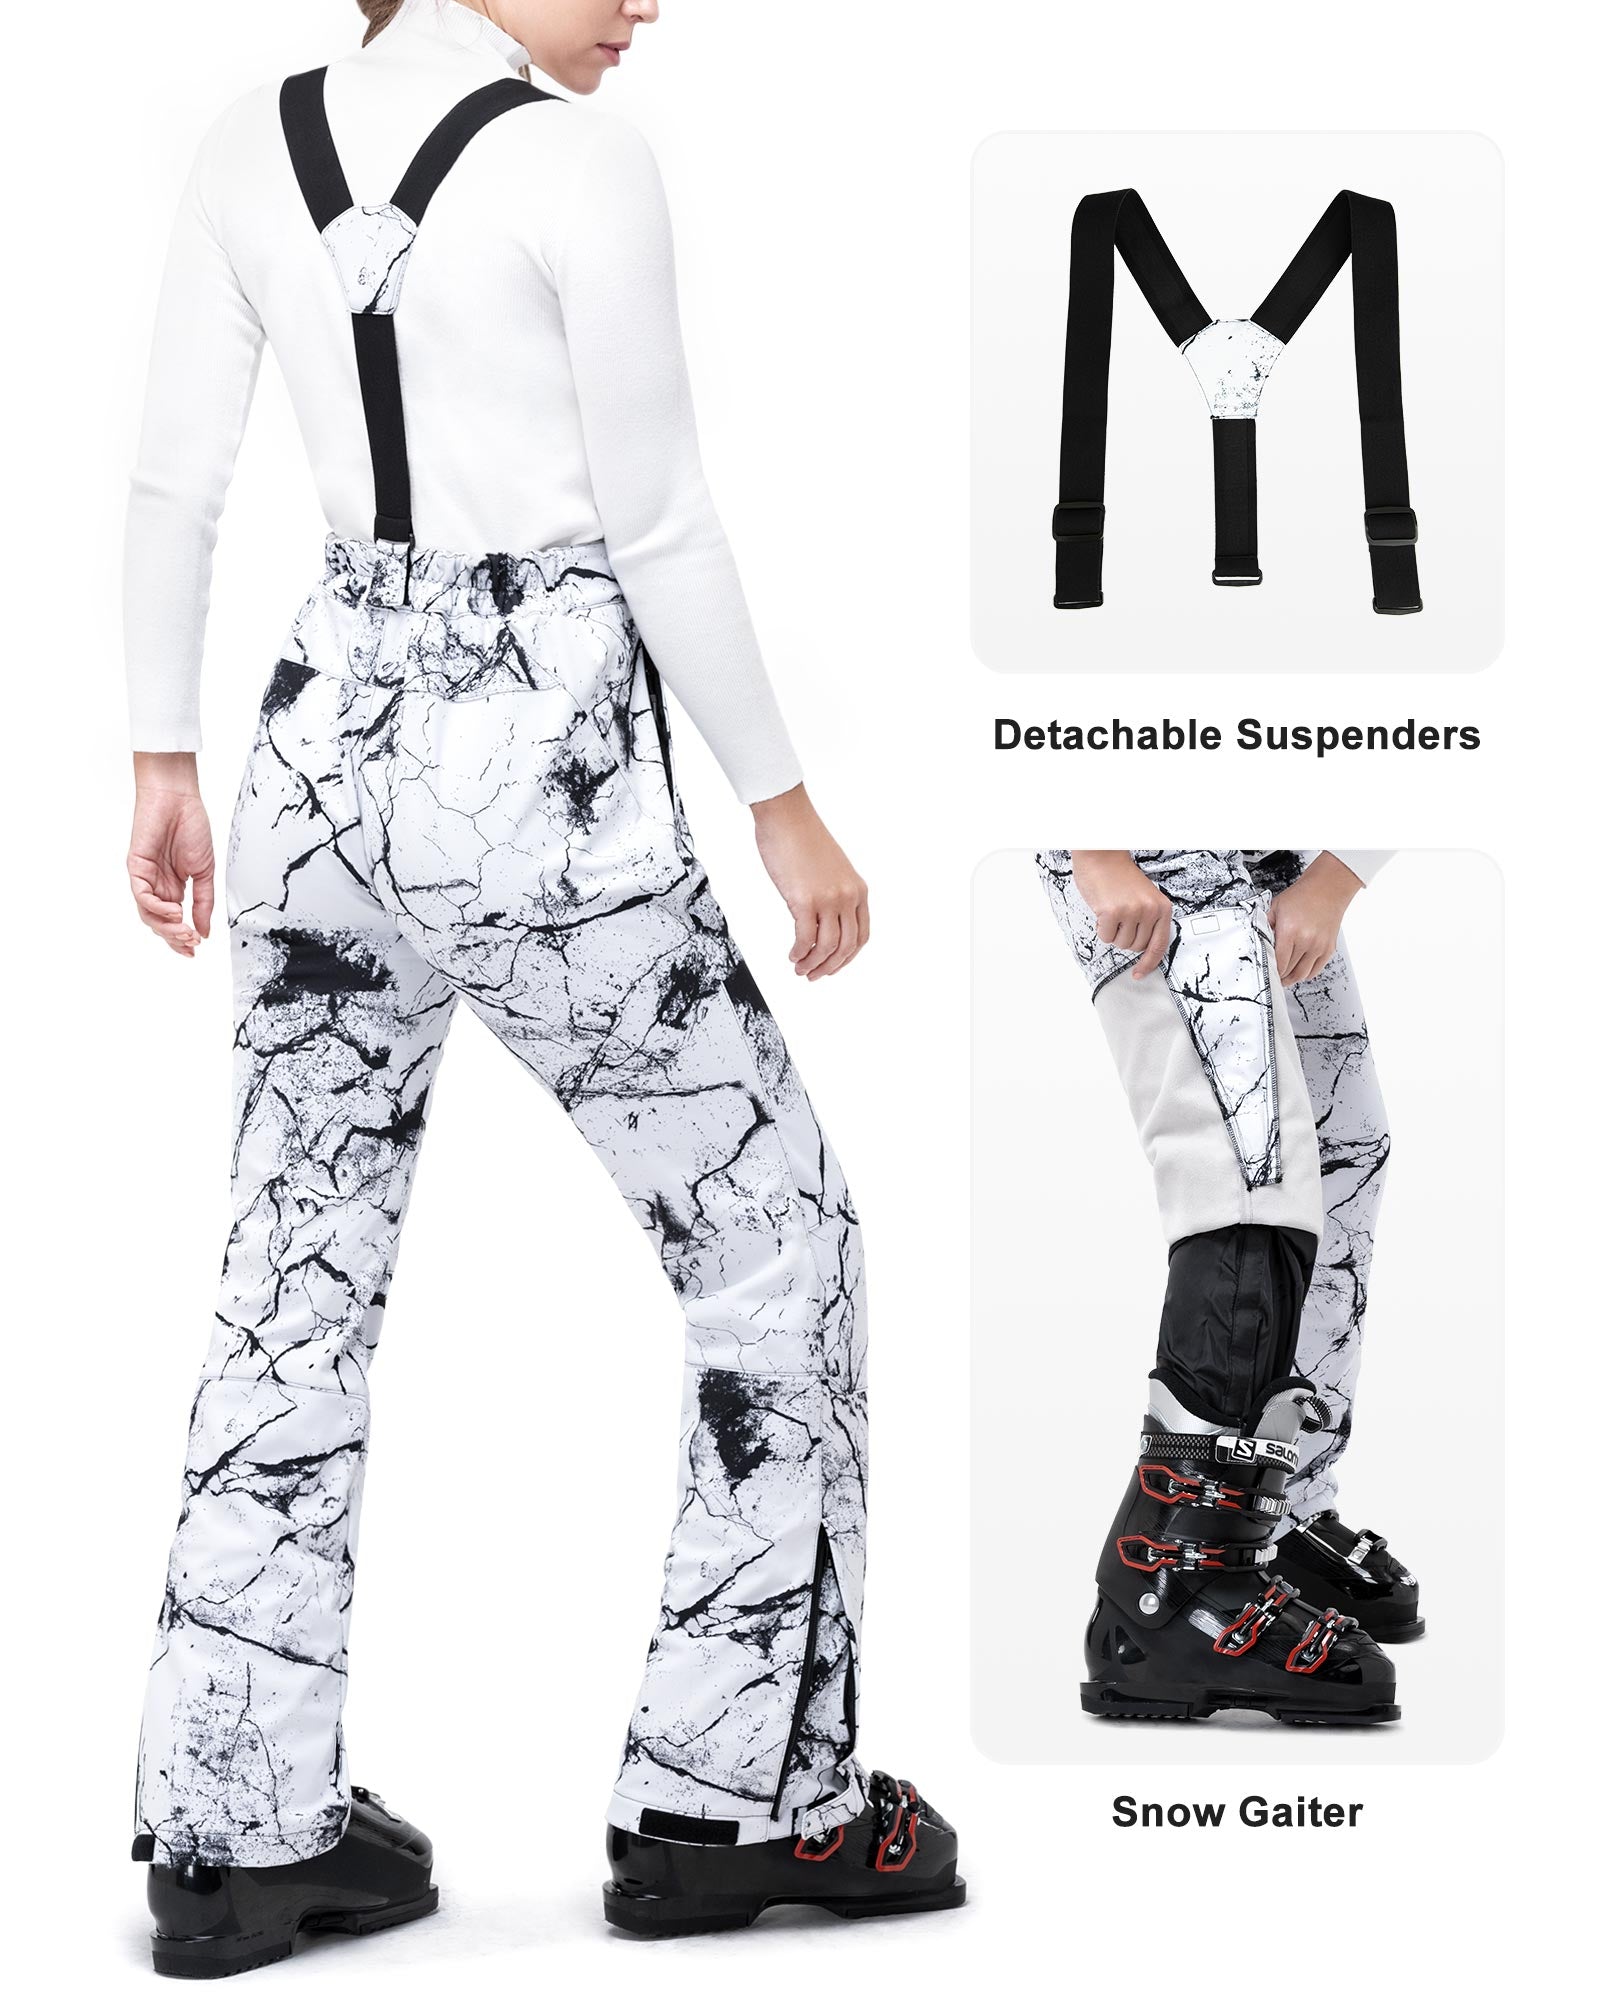 Buy 33,000ft Women's Snow Pants - Snowboard Ski Pants with Removable  Suspenders Waterproof Softshell Snow Bibs, Fissure, Small at